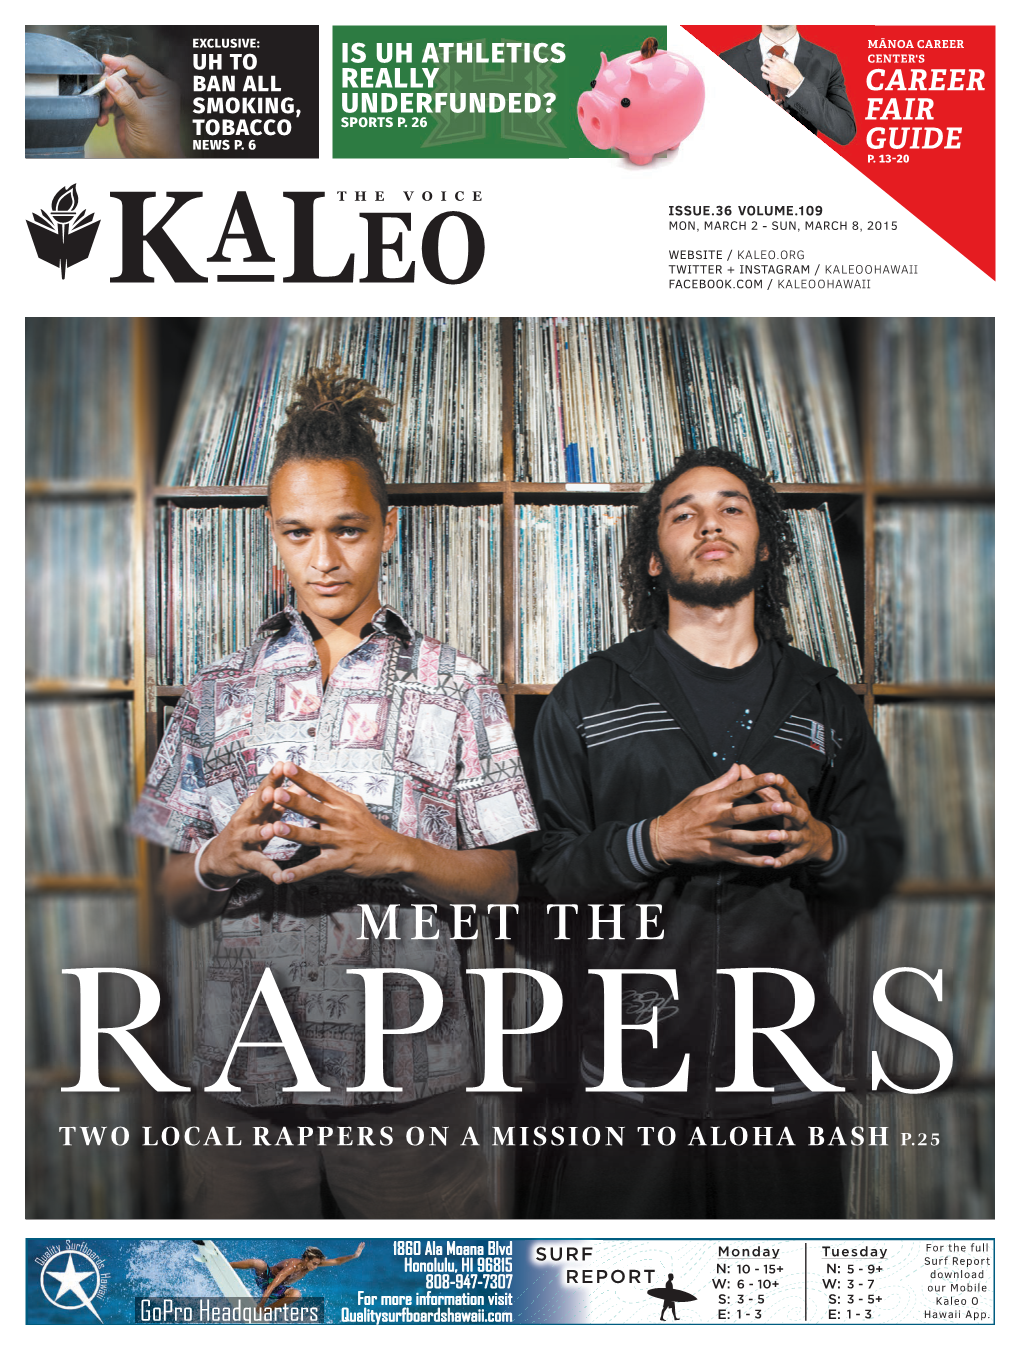 Meet the Rappers Two Local Rappers on a Mission to Aloha Bash P.25